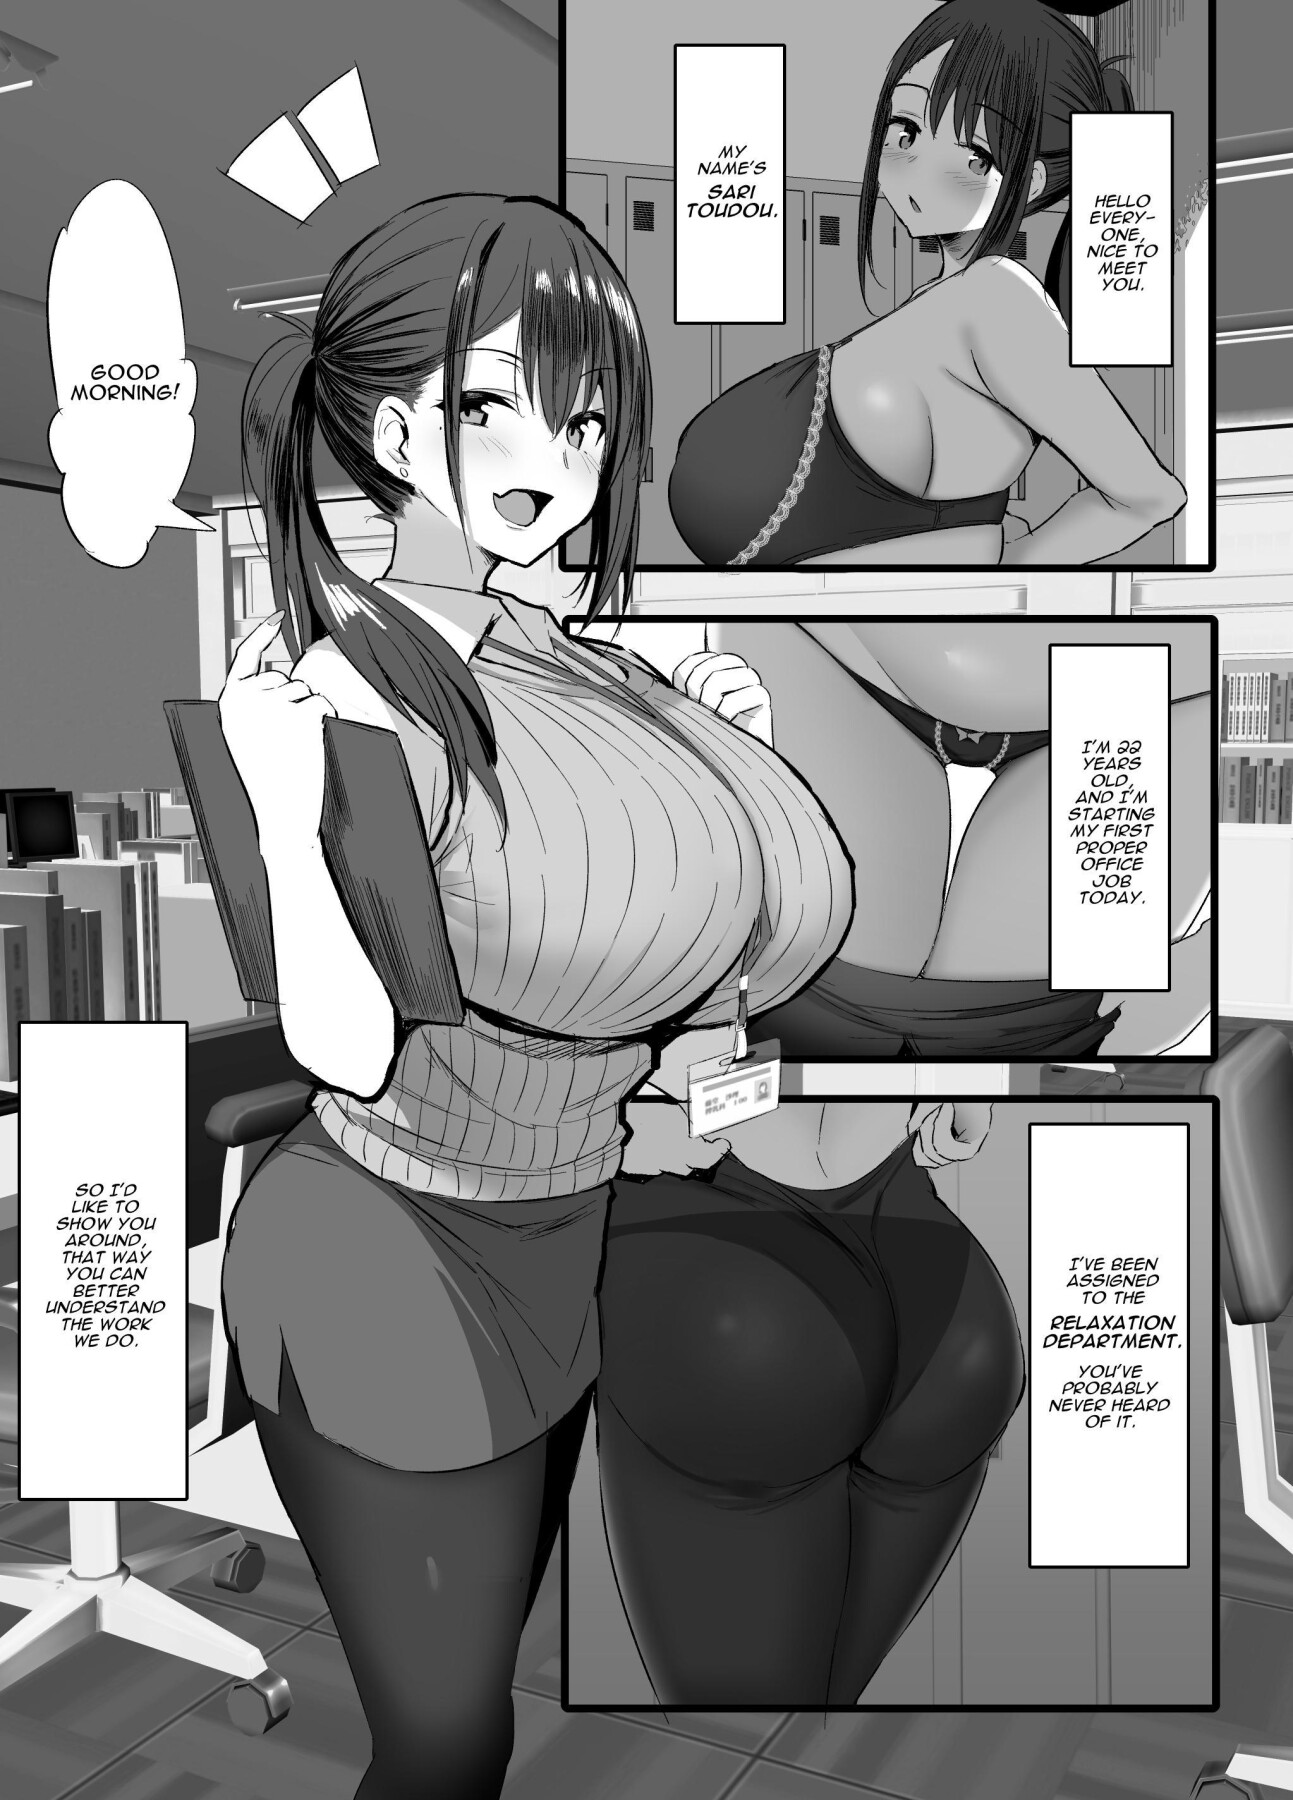 Hentai Manga Comic-I was Assigned to Comfort the Department-Read-2